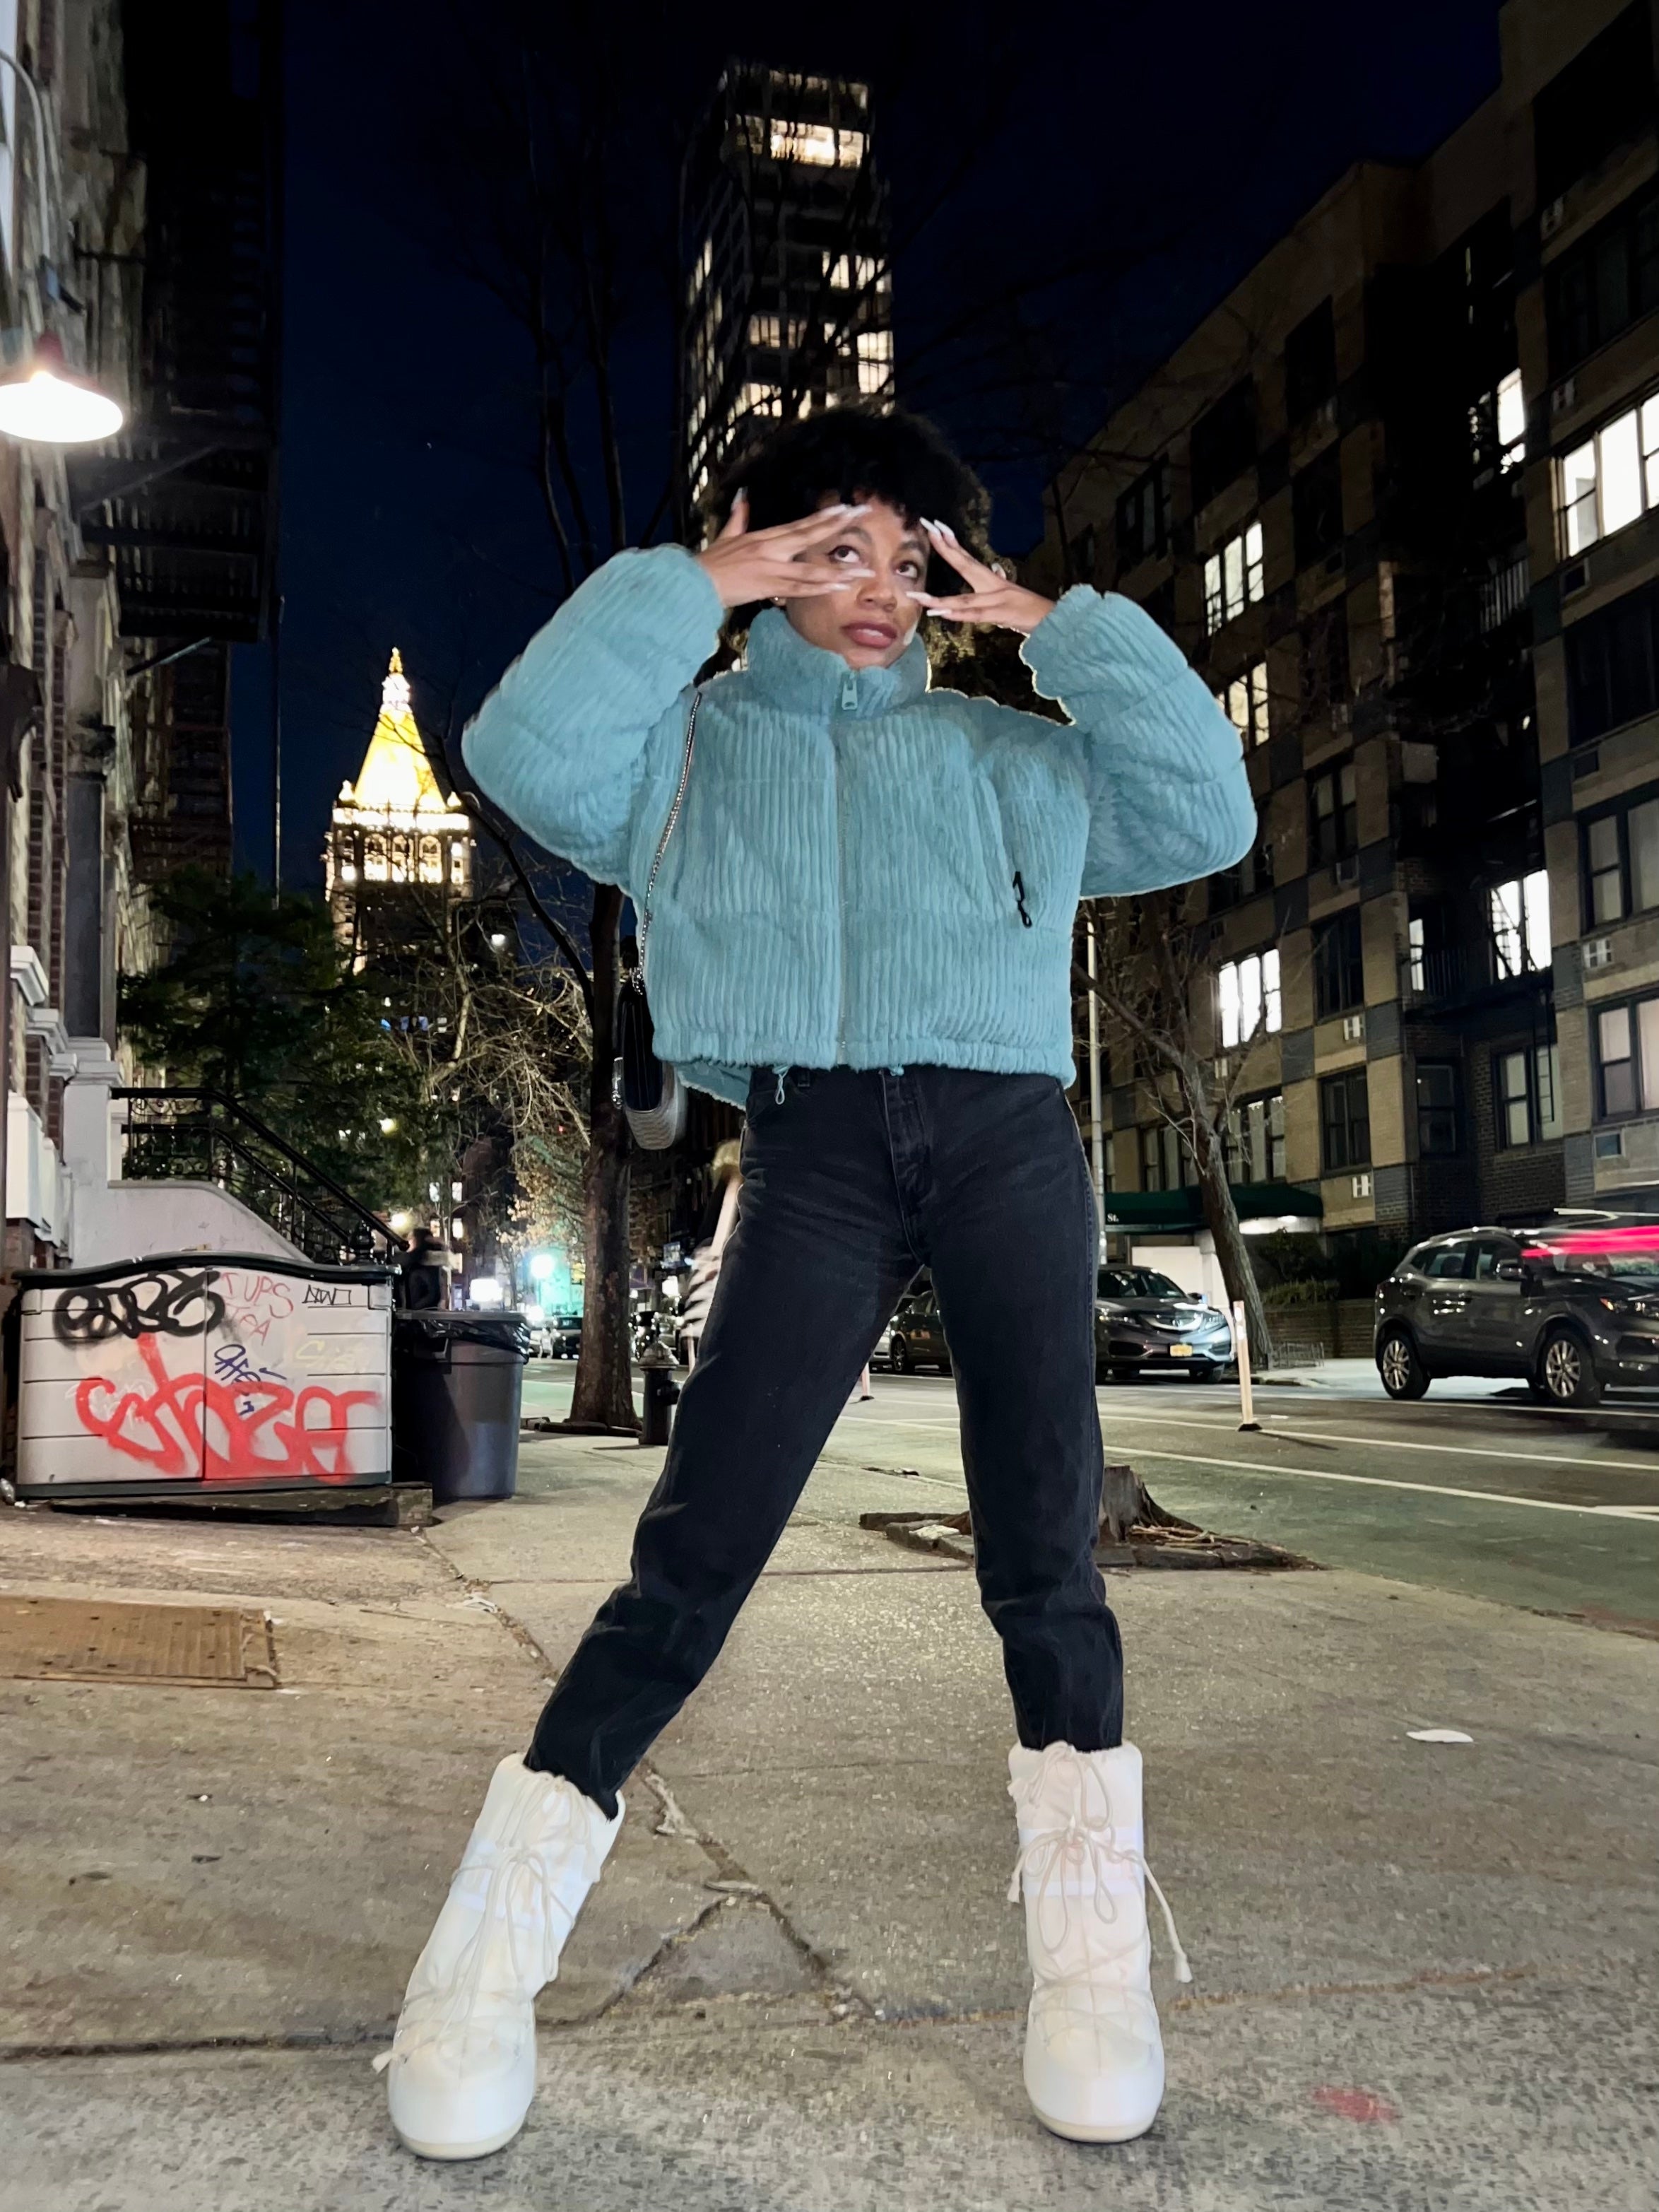 I Tried Moon Boots With 3 Outfits & Here's How It Went